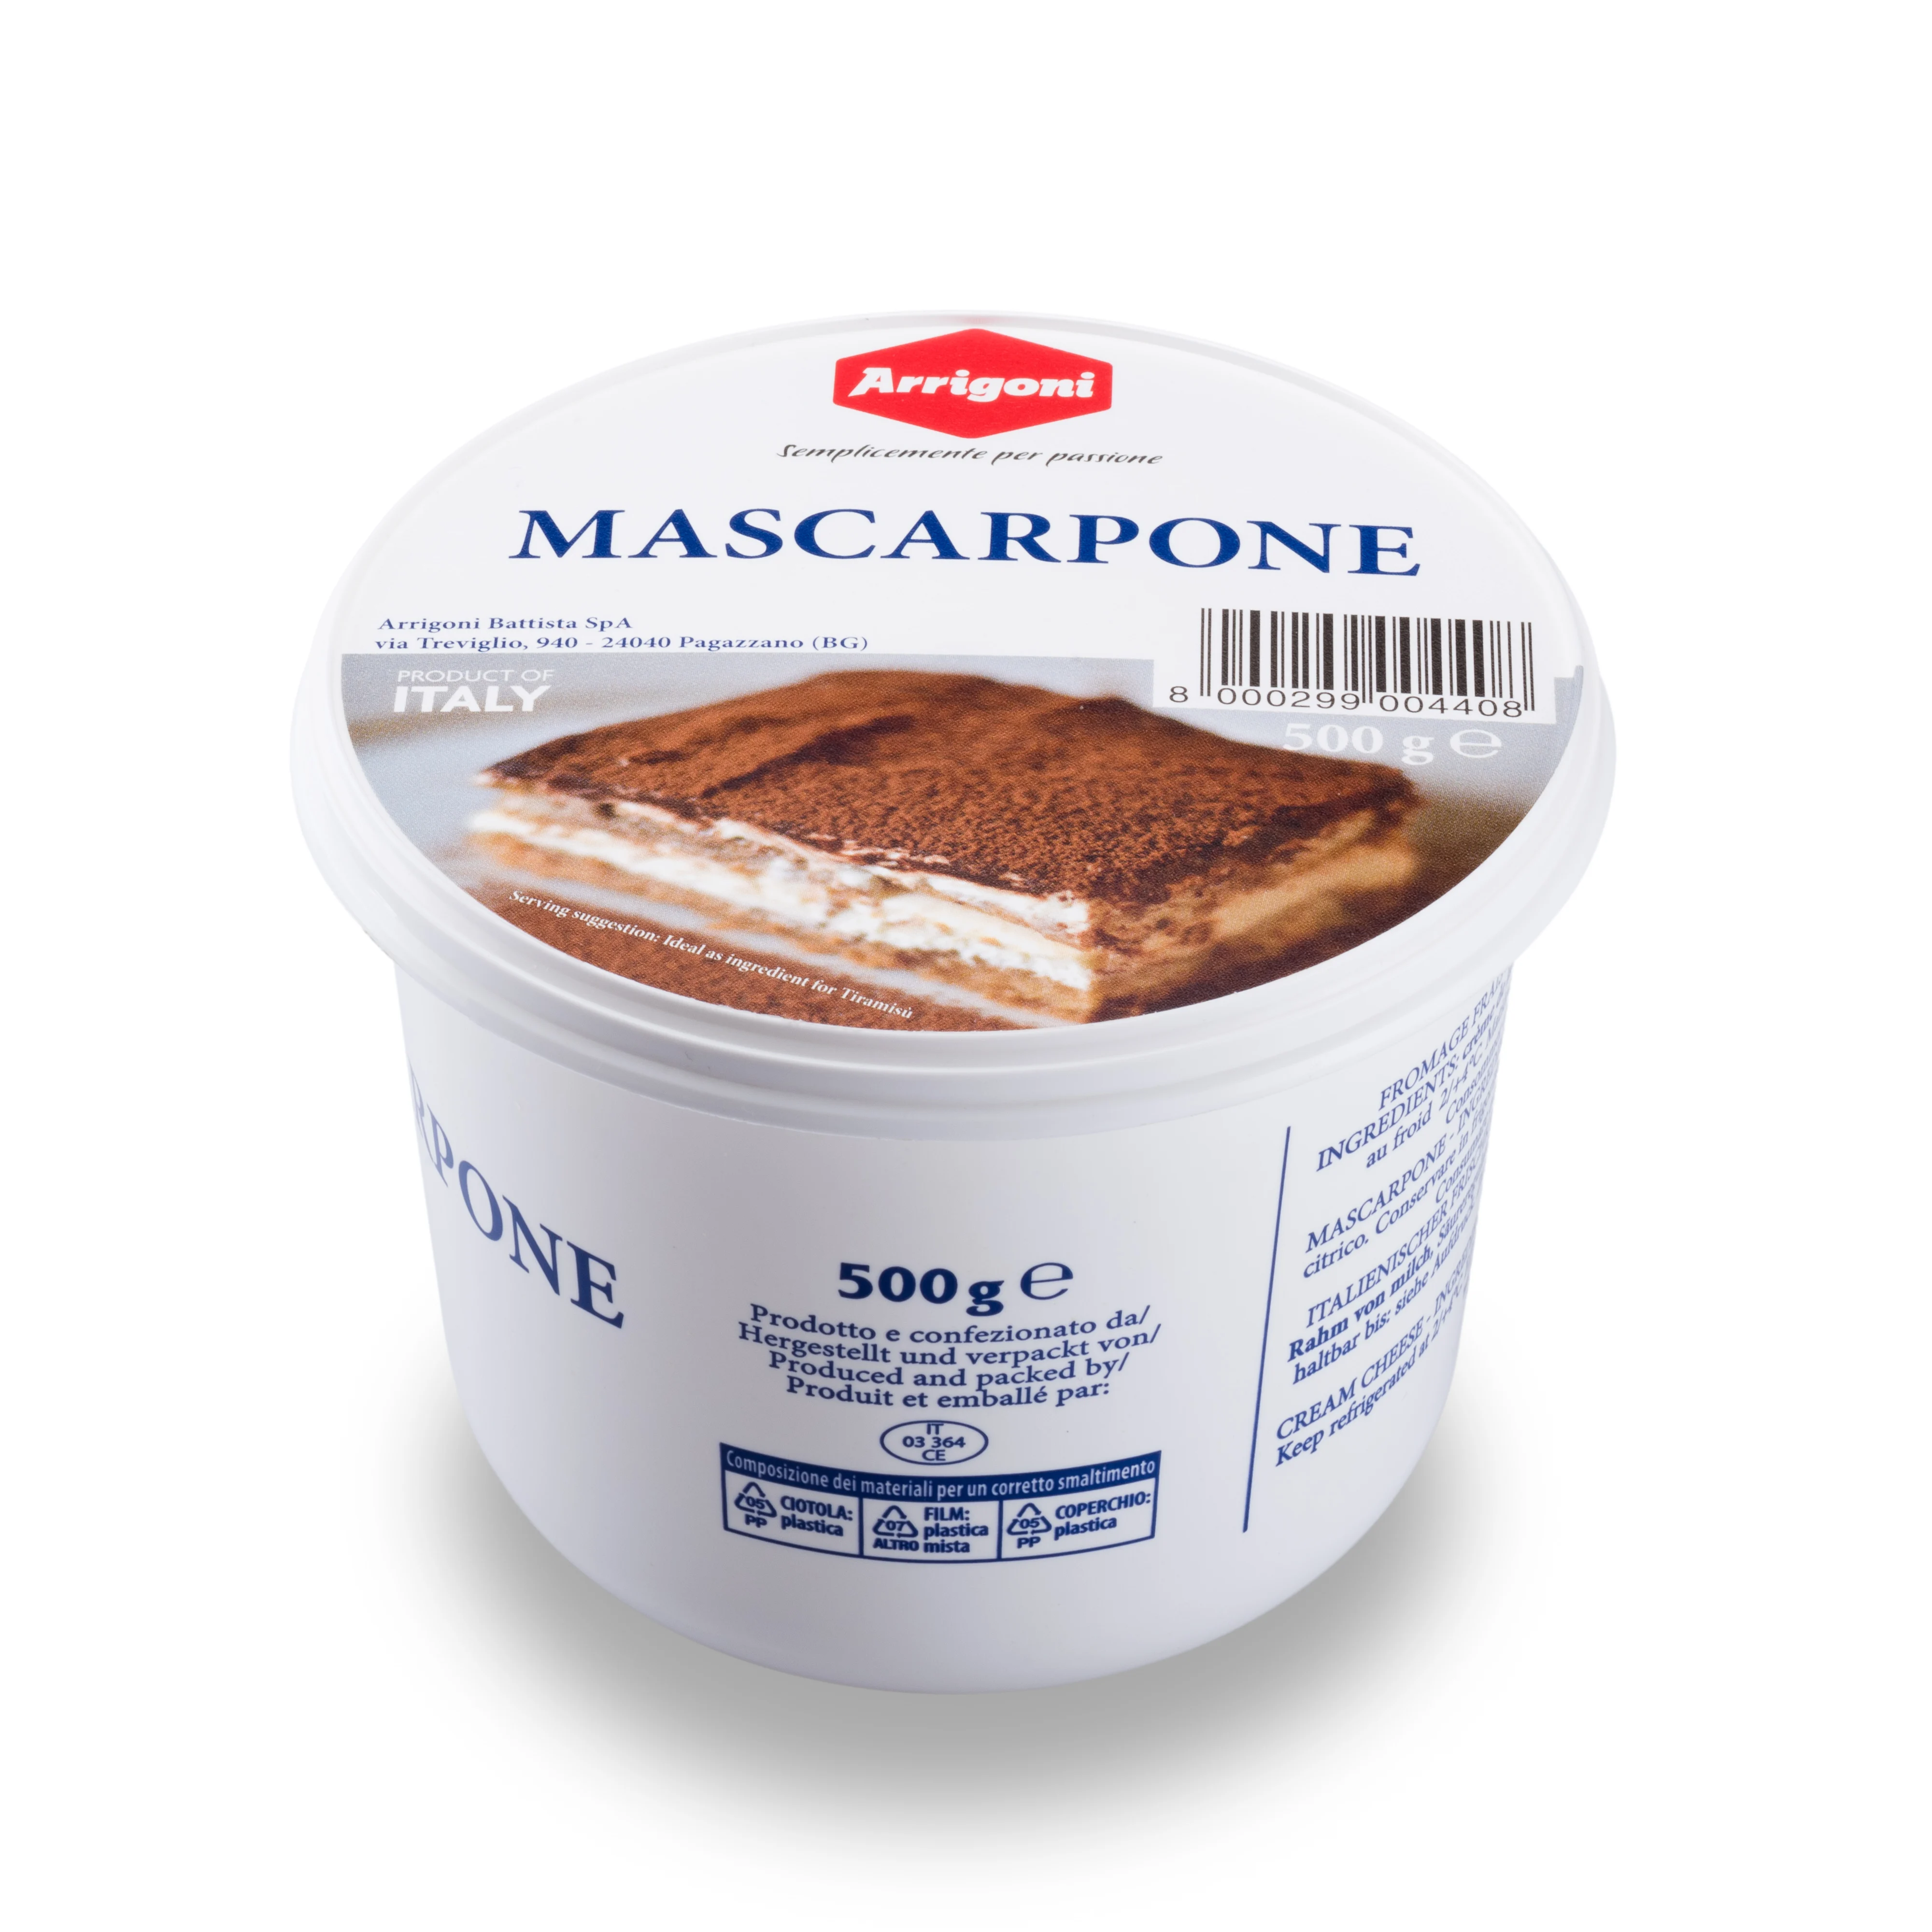 Mascarpone Cheese Made In Italy Fresh Cheese Mascarpone 500g Buy Mascarpone Cheese Cheese Cake Cream Cheese Product On Alibaba Com